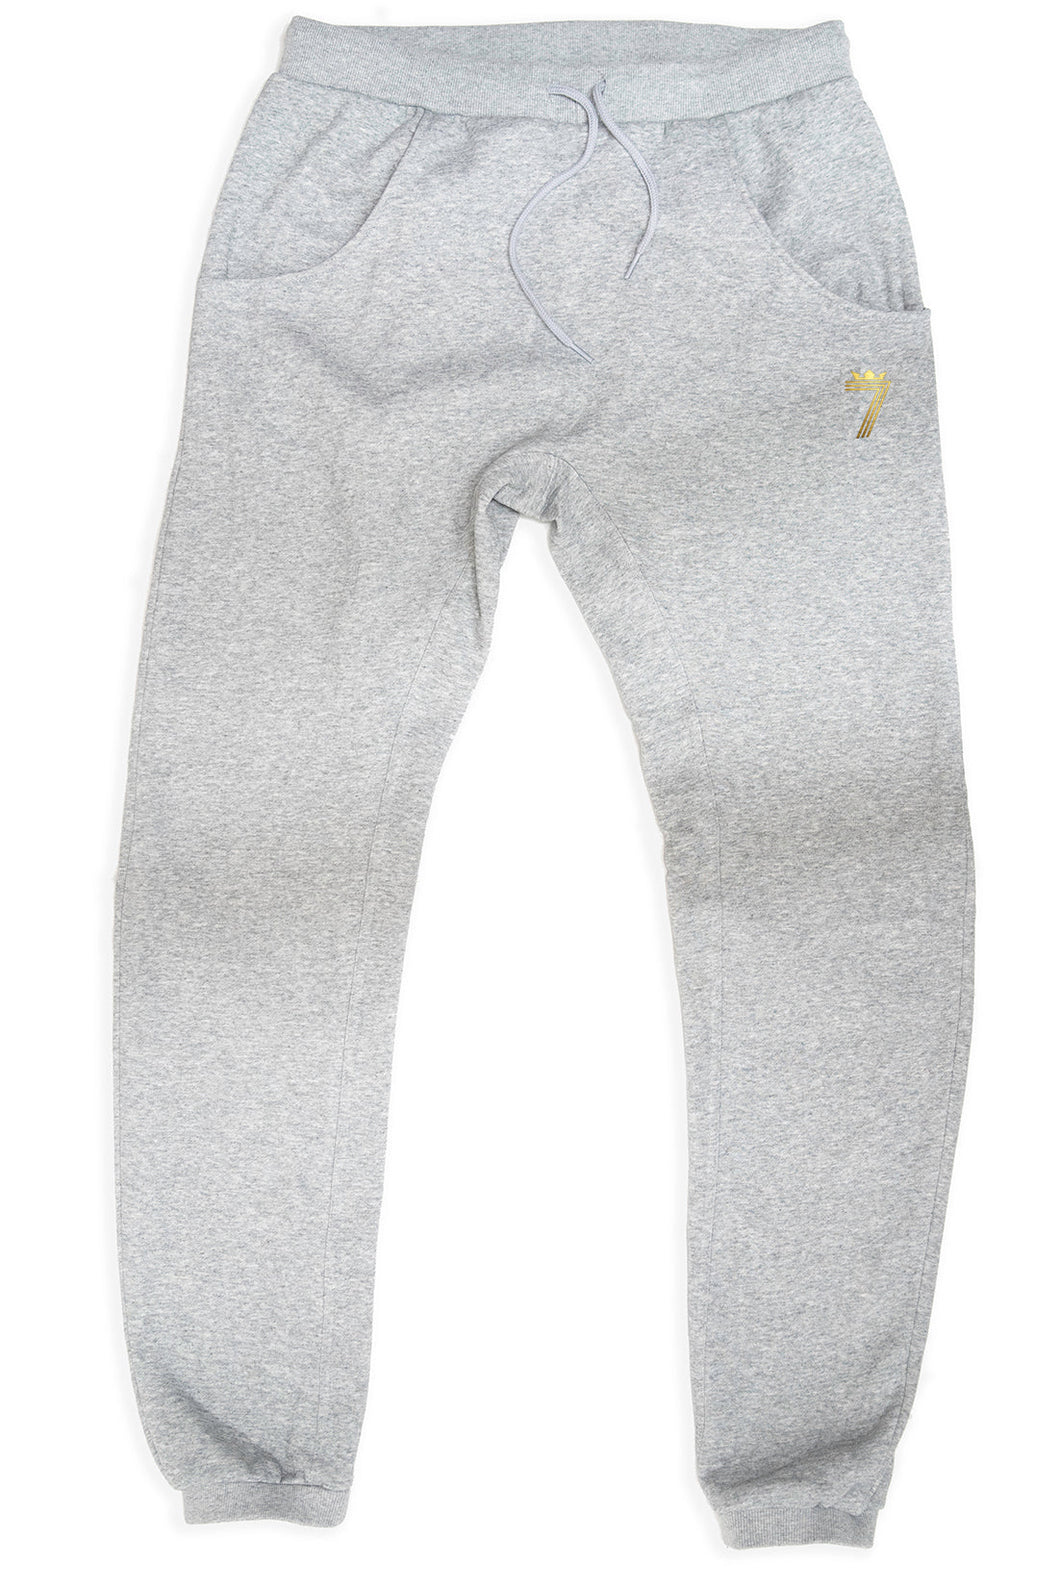 DALGLISHGOLD #7 Heavy Deep Crotch Joggers (2 Different Colours of Jogger)